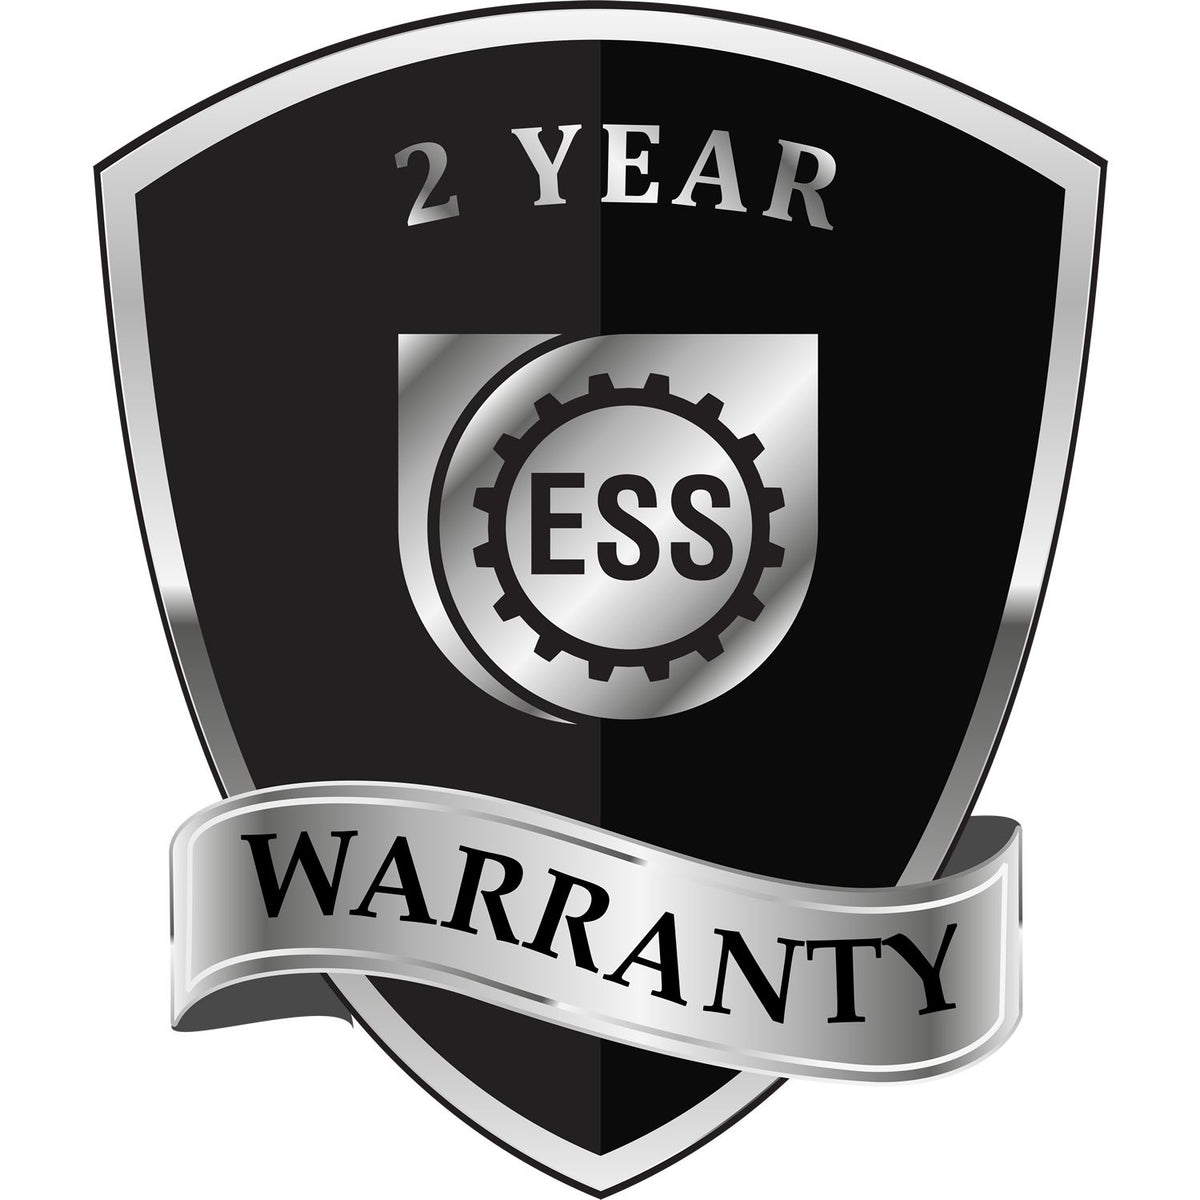 A badge or emblem showing a warranty icon for the Heavy Duty Cast Iron New Mexico Engineer Seal Embosser